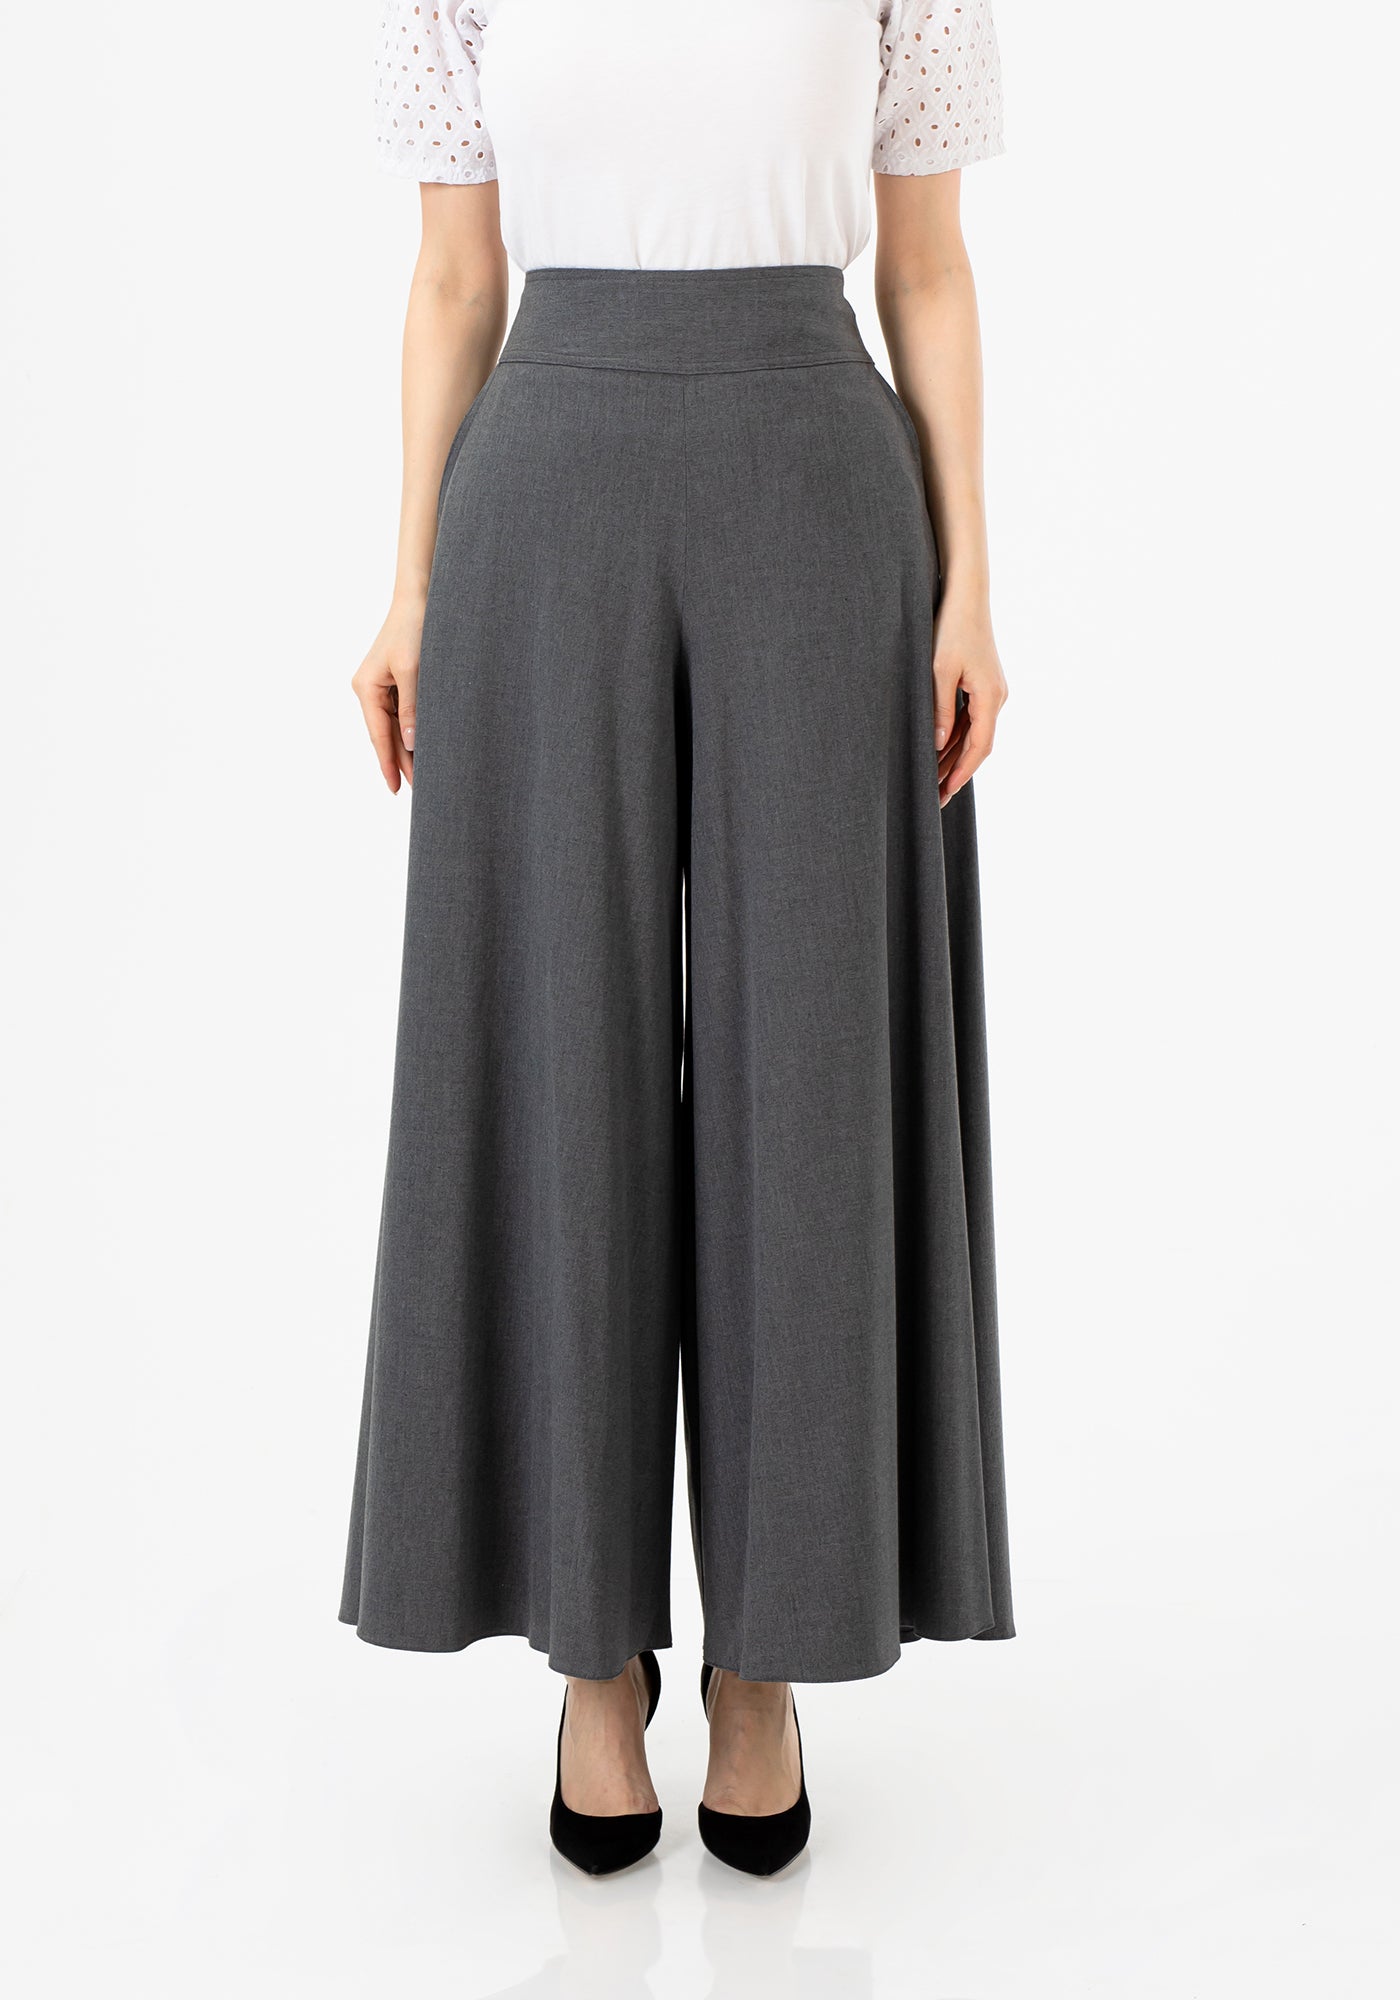 Chiclily Belted Wide Leg Pants for Women High Waisted Business Casual Palazzo  Pants Work Trousers Loose Flowy Summer Beach Lounge Pants with Pockets, US  Size Small in Blue Gray - Walmart.com